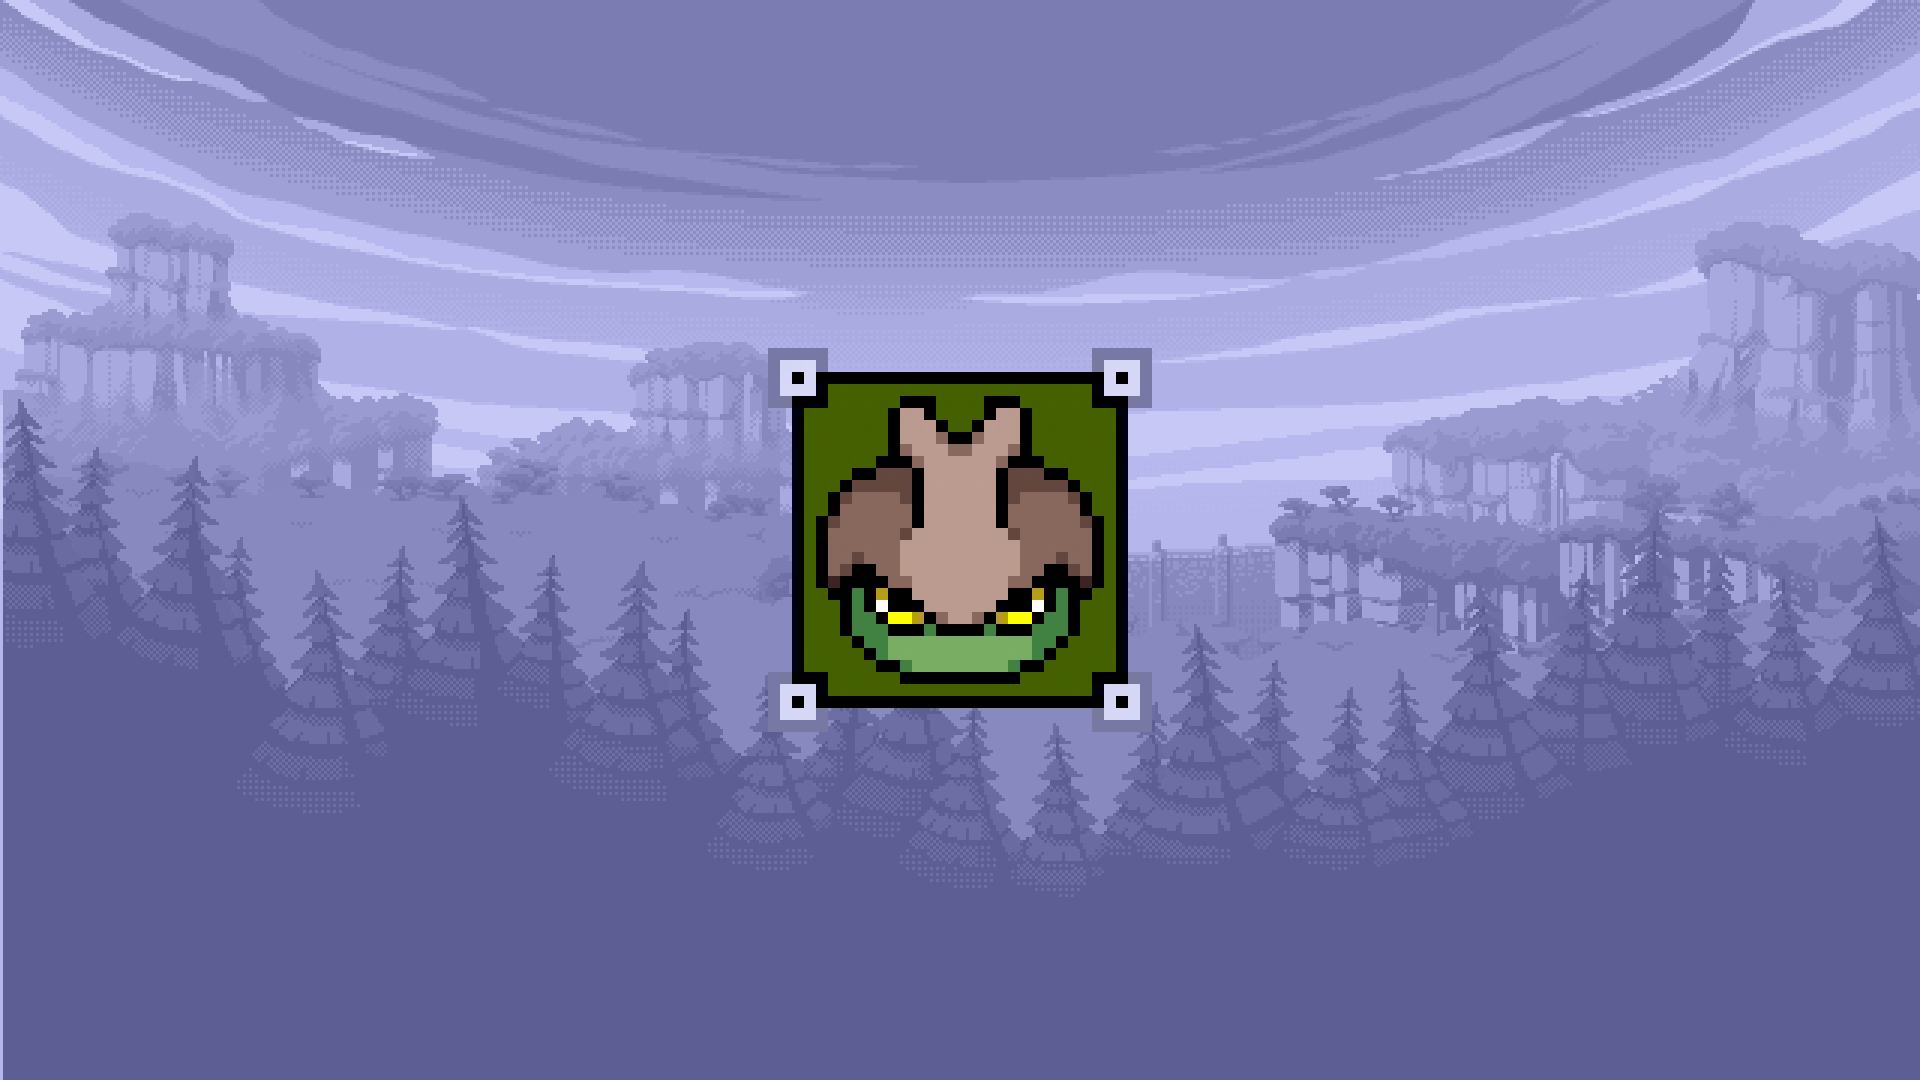 Icon for A Rocky Start